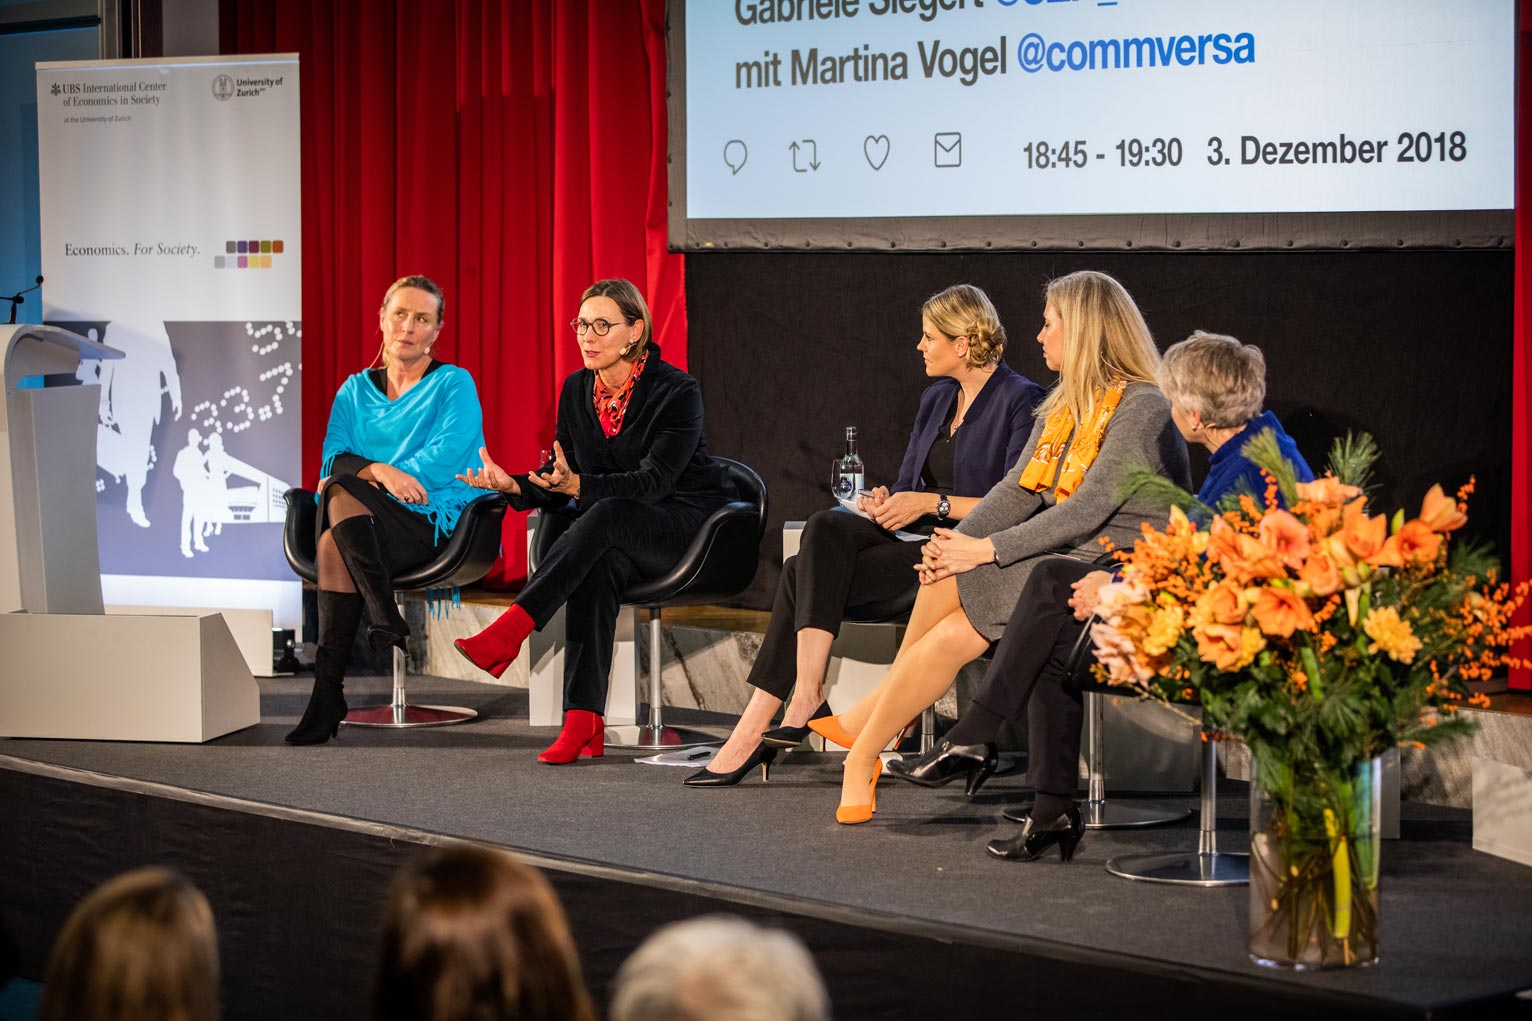 Like Iris Bohnet (far left), Gabriele Siegert (second from left) stressed that all people are biased, men and women.